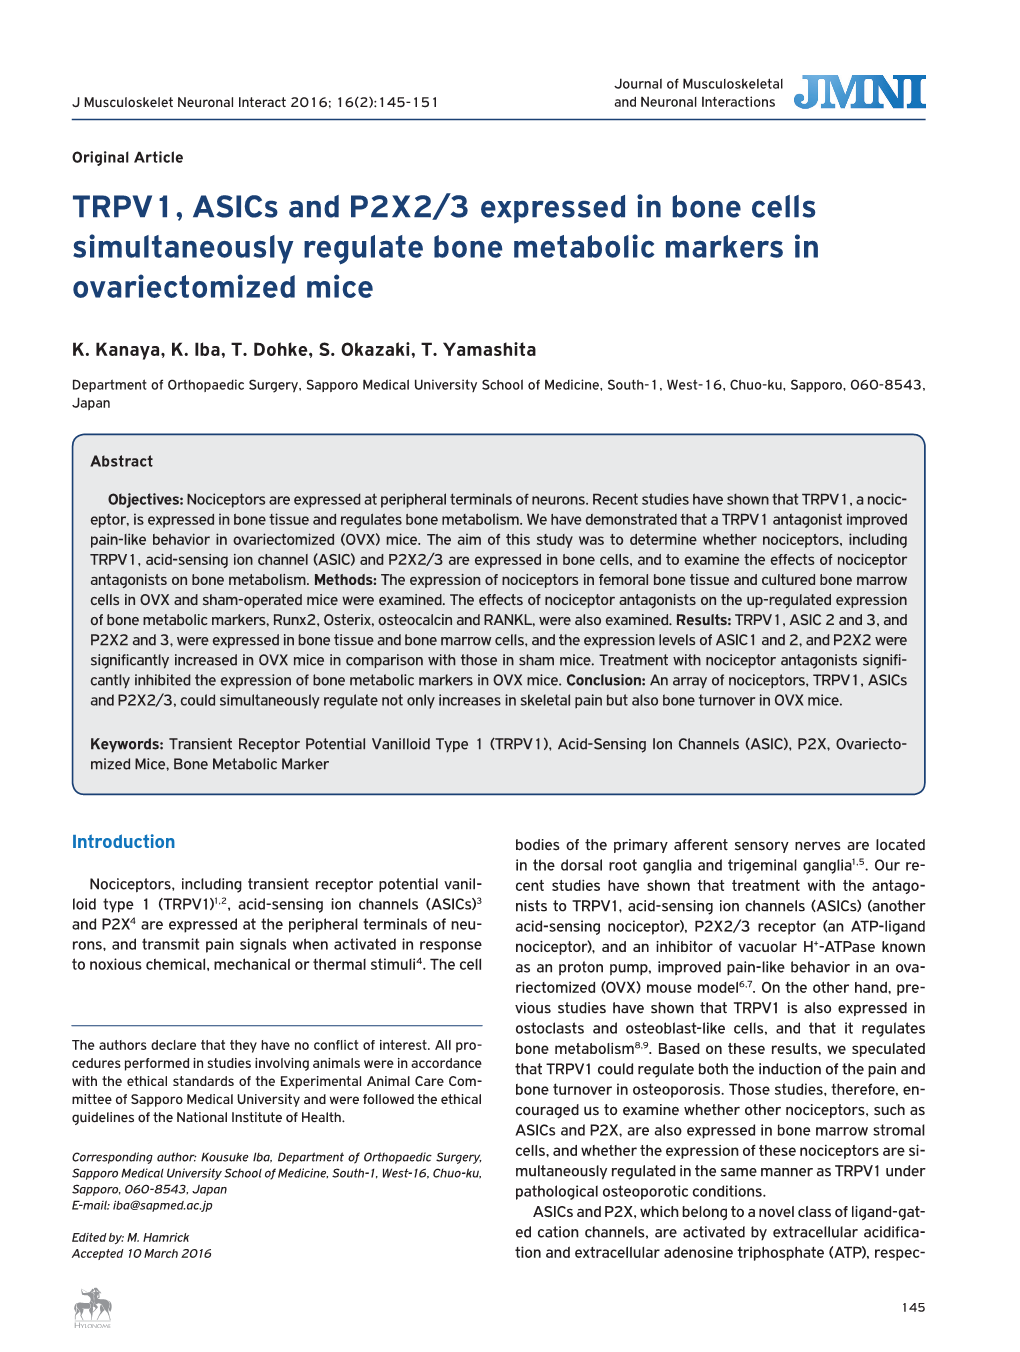 TRPV1, Asics and P2X2/3 Expressed in Bone Cells Simultaneously Regulate Bone Metabolic Markers in Ovariectomized Mice